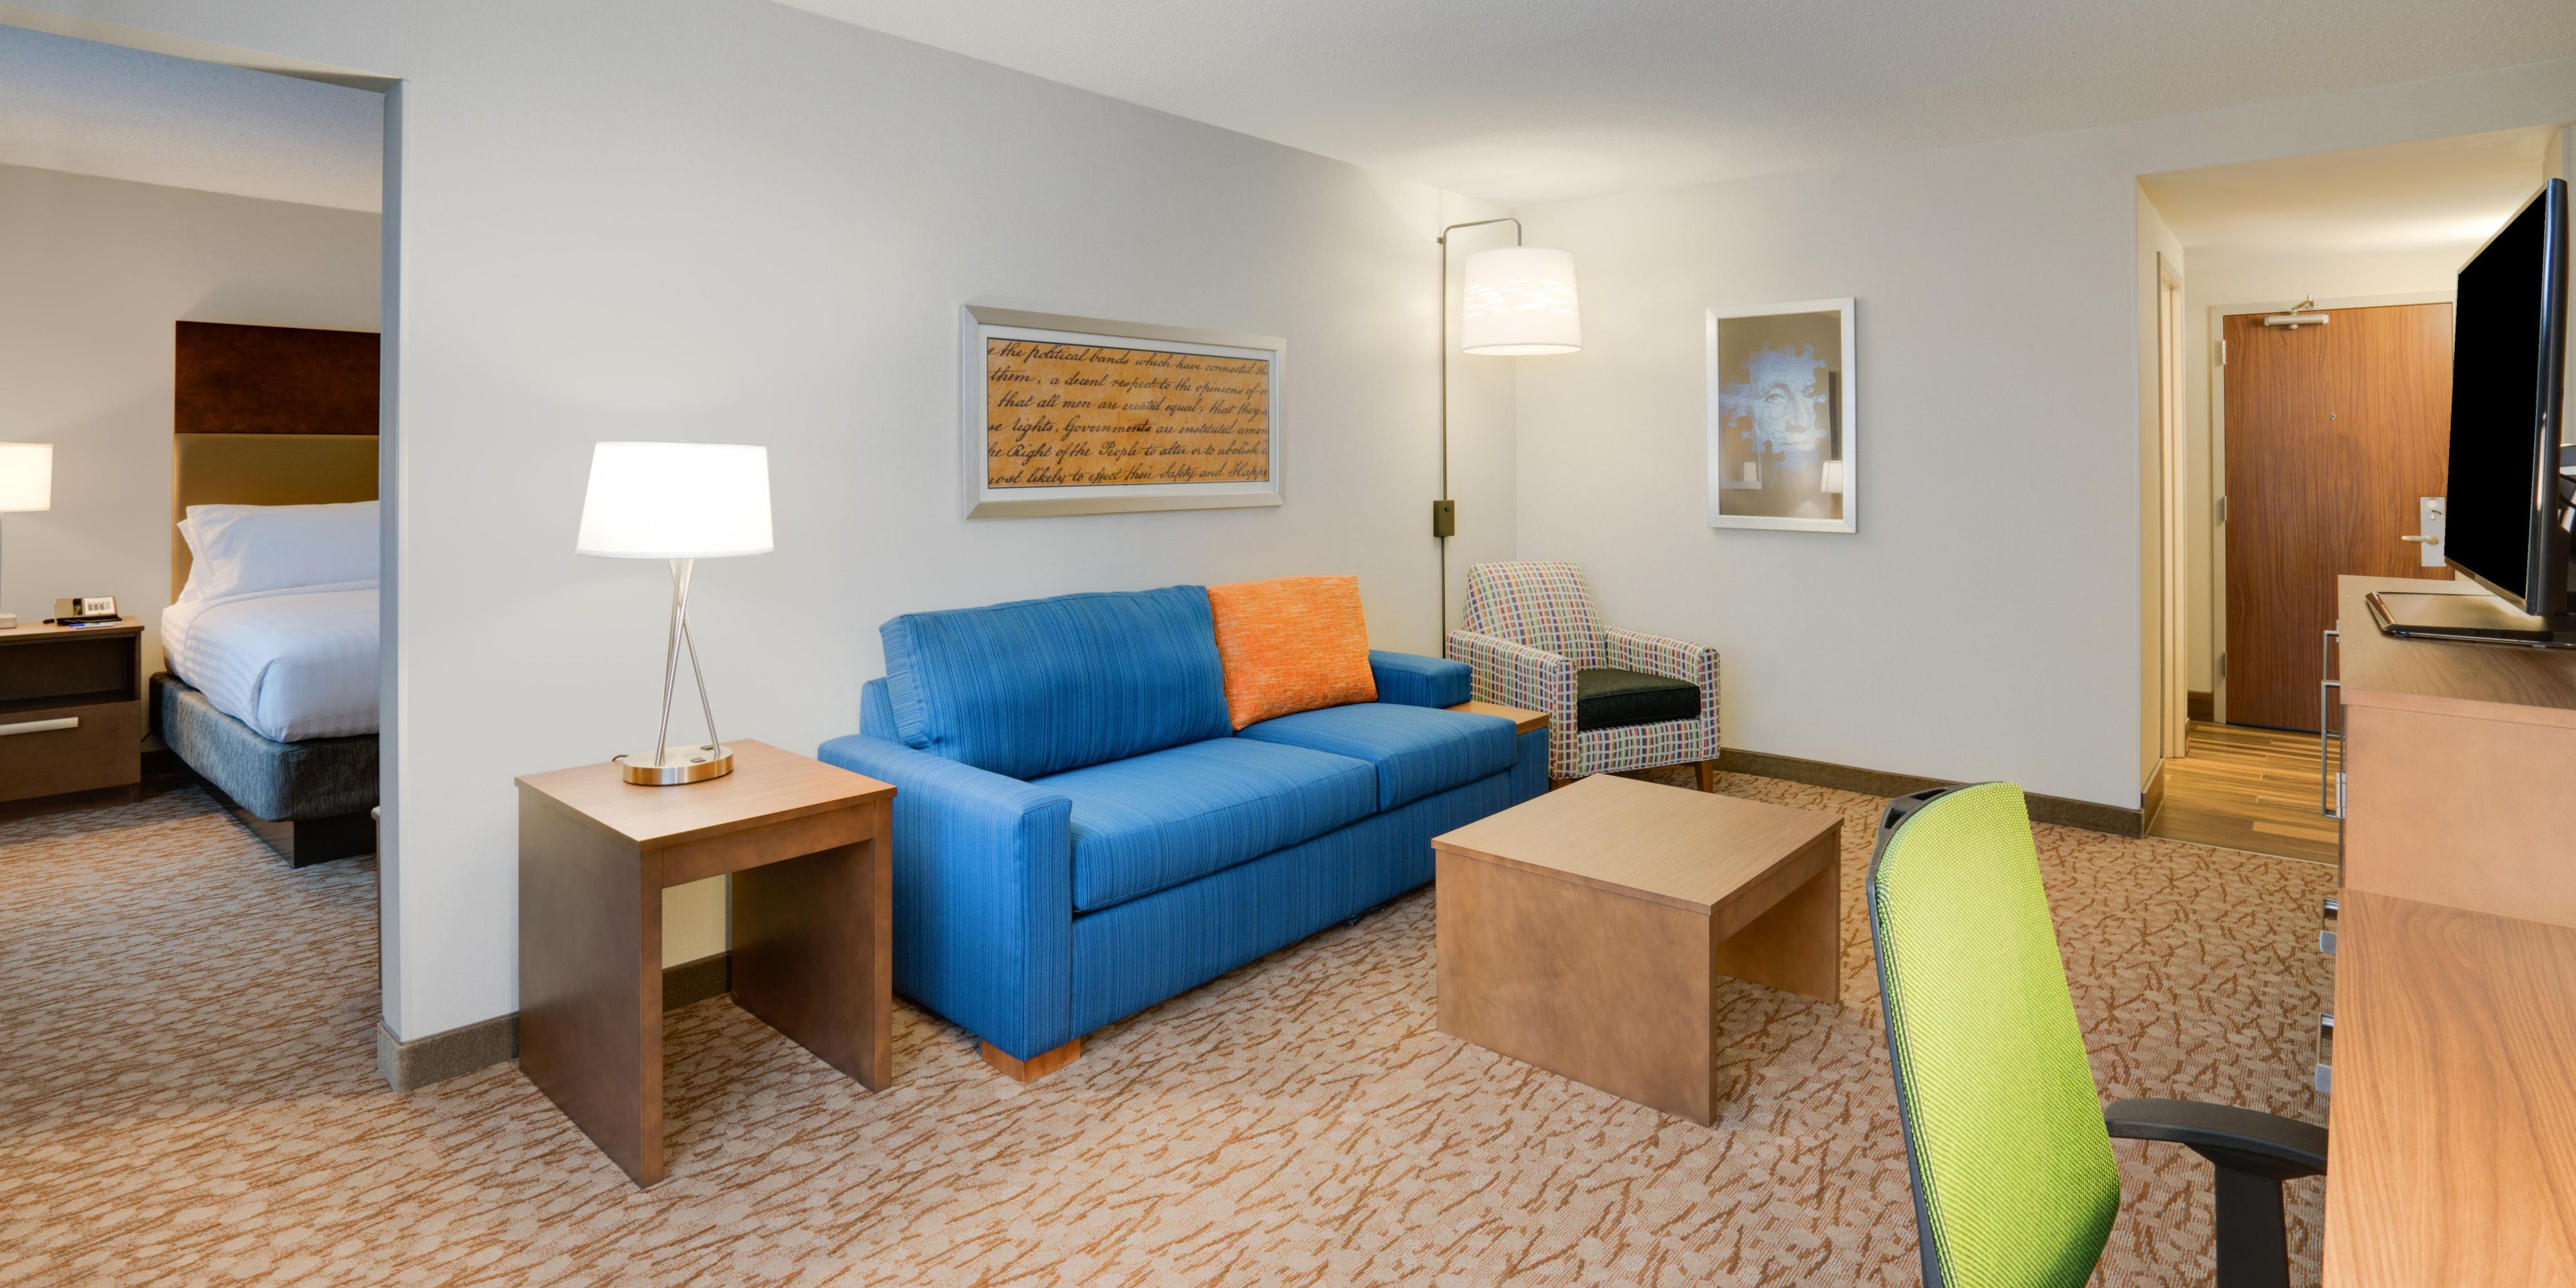 Relax in spacious rooms and suites designed for your lifestyle. From a Keurig coffee maker to a mini refrigerator and microwave, we offer every convenience. Sink into a plush king or queen bed, watch a movie on your flat screen TV, be productive at a work desk, and stay connected with free Wi-Fi. Enjoy travel made simple.